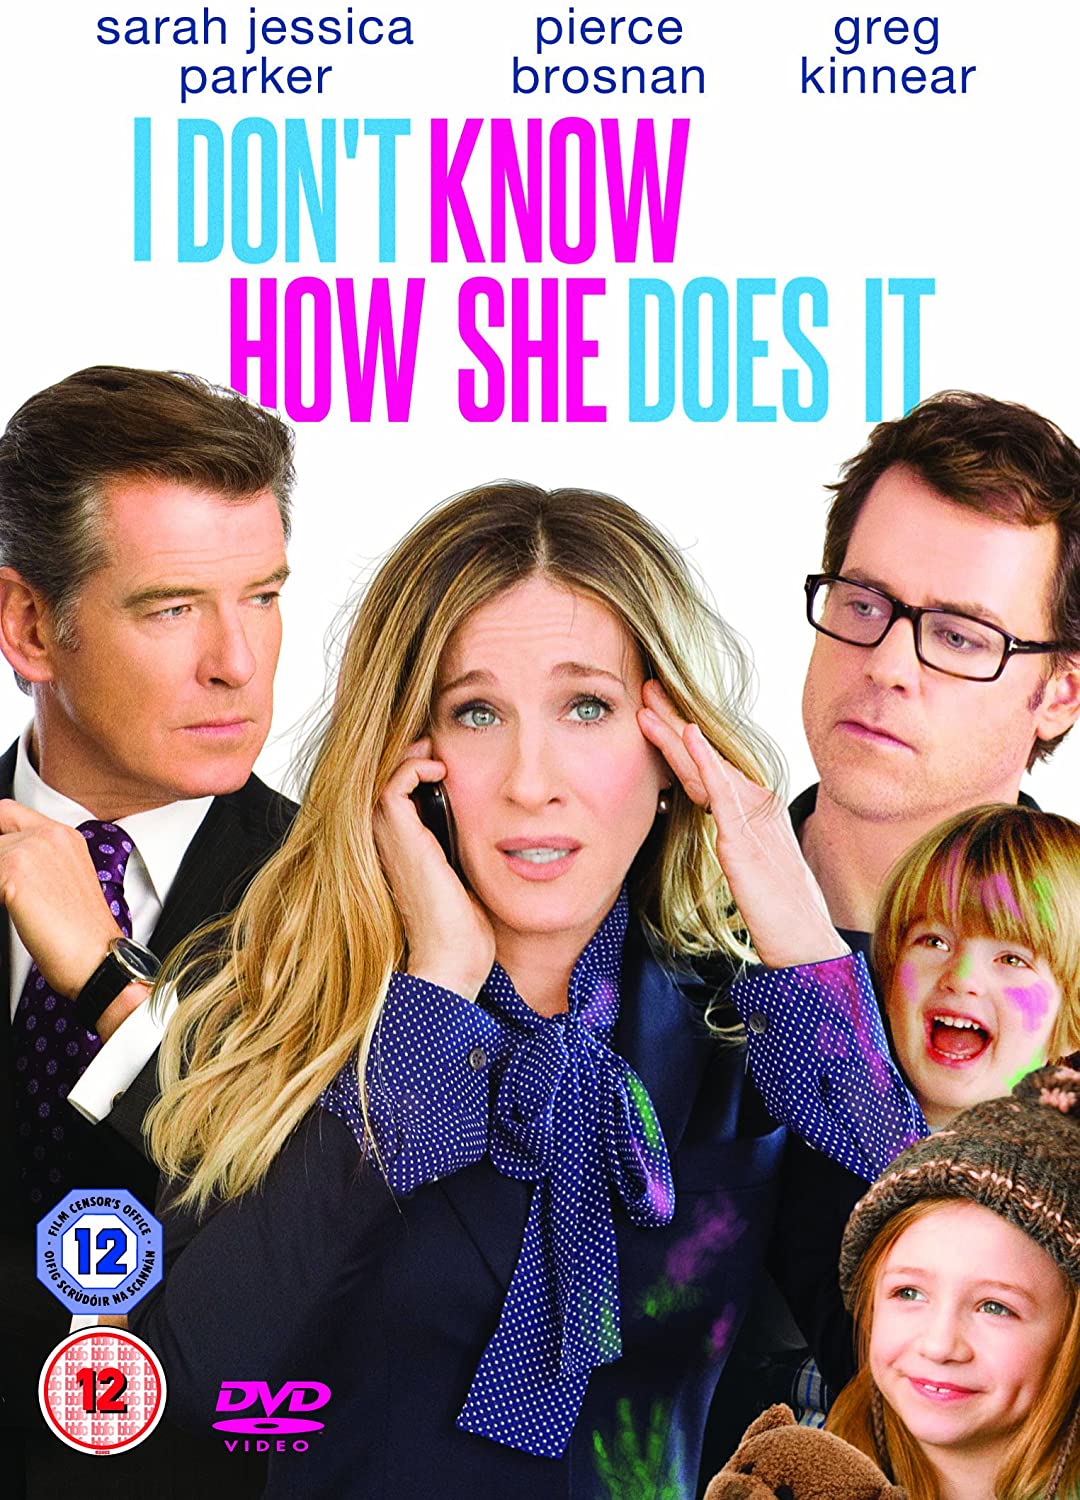 I Don't Know How She Does It - Comedy/Romance [DVD]